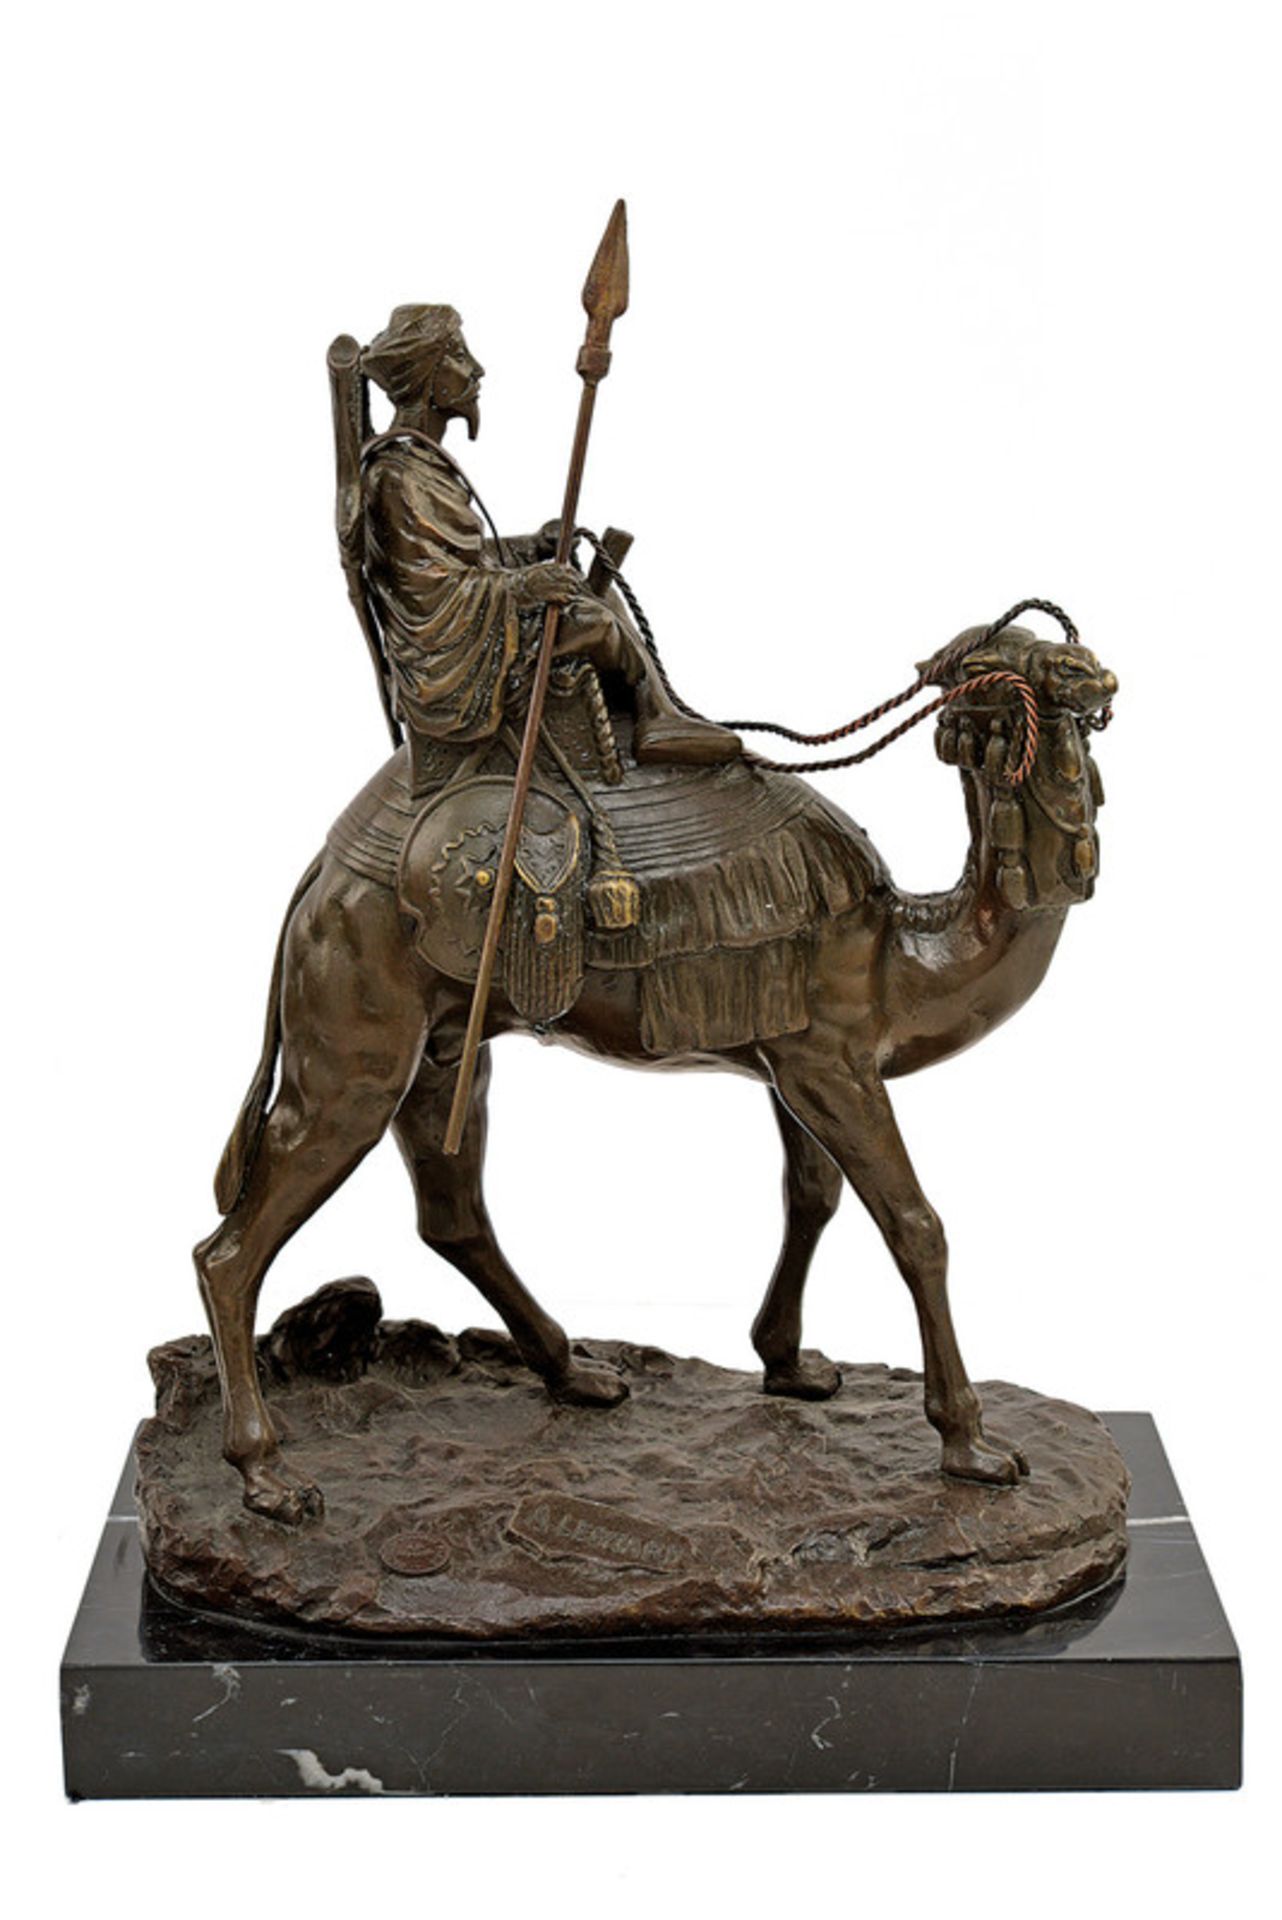 A warrior on a dromedary dating: 20th Century provenance: Europe Bronze, in the round depiction of a